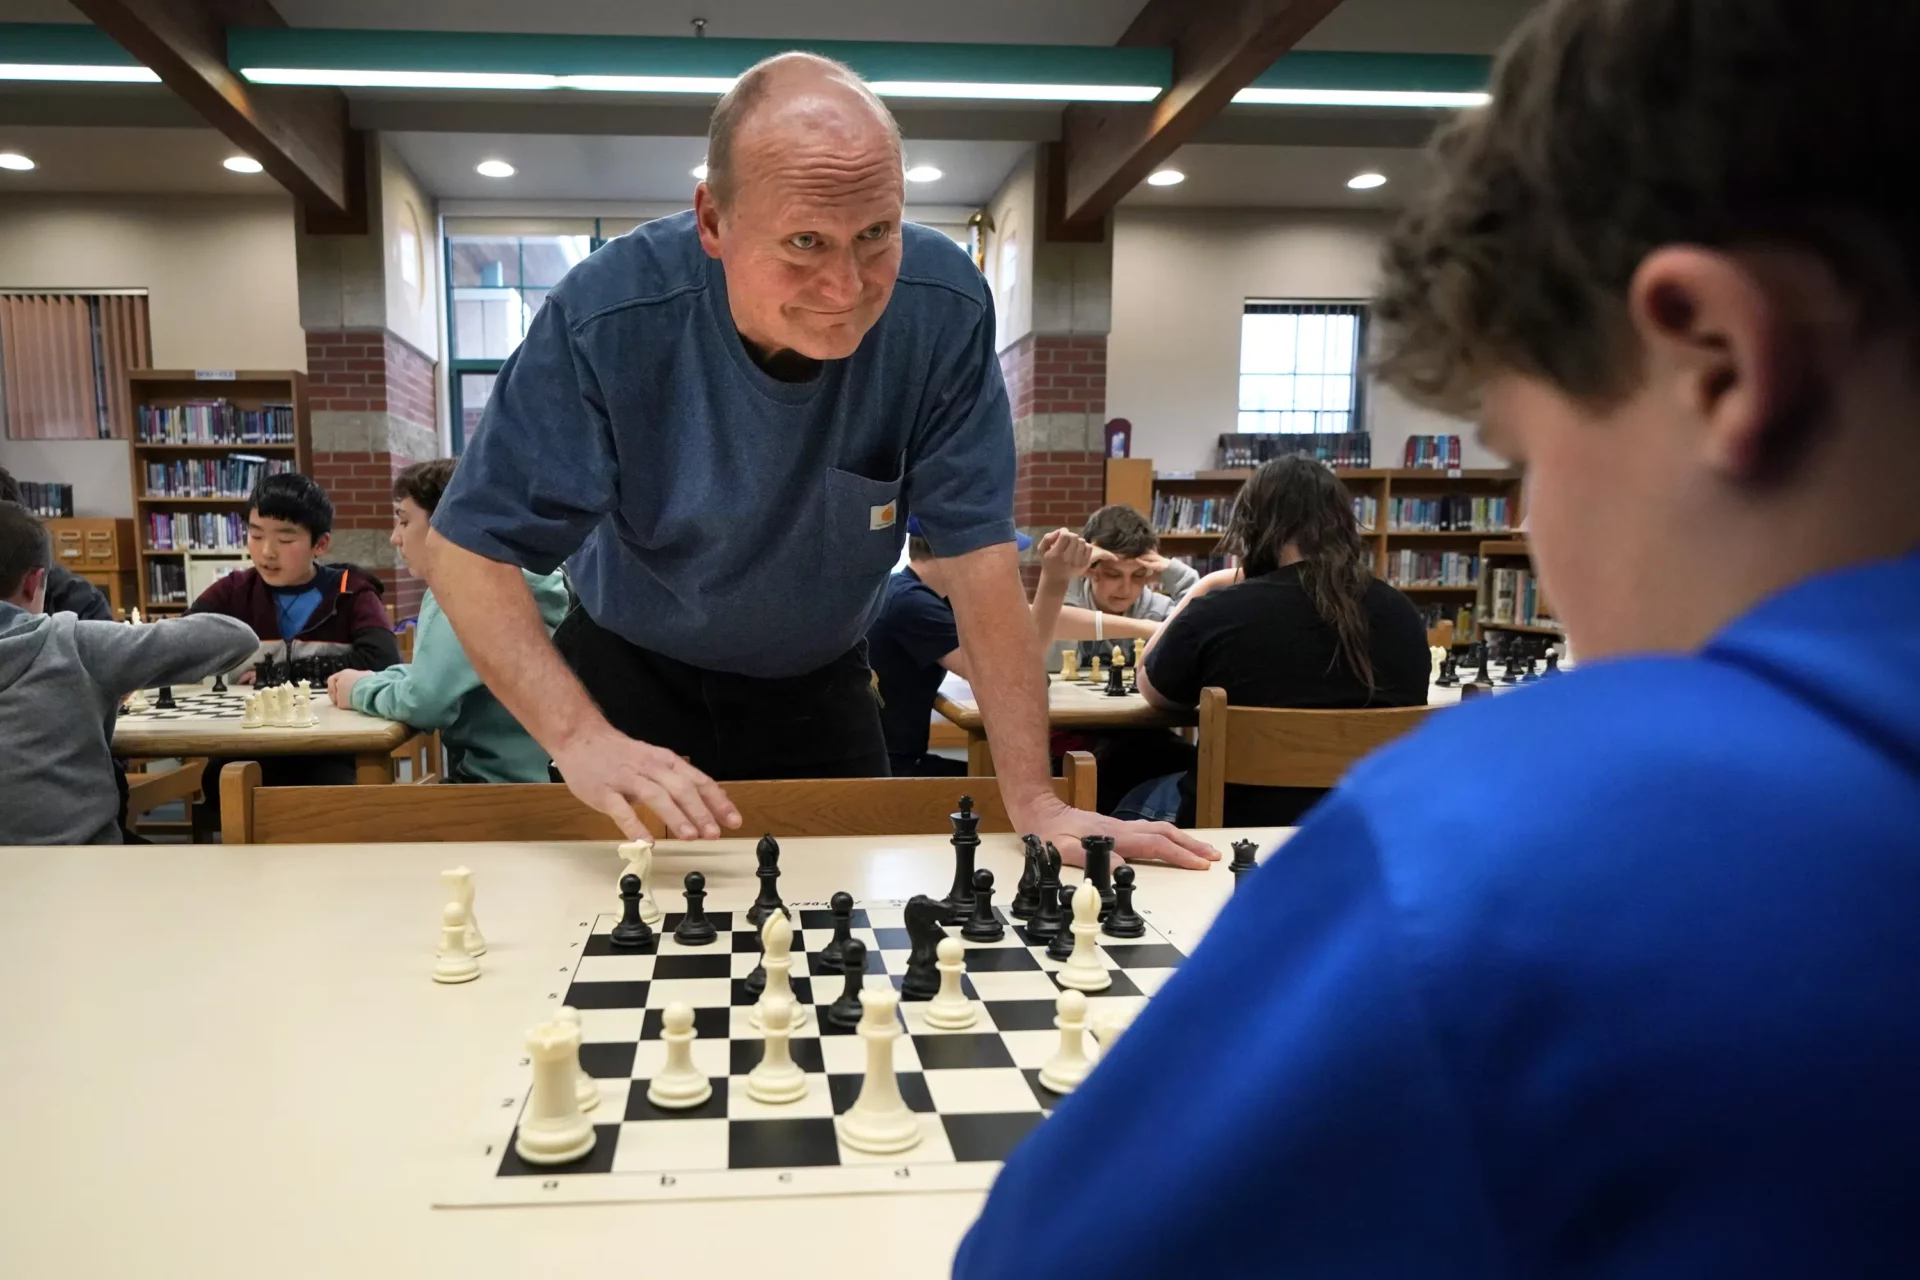 Making moves: How one organization is using chess to build community